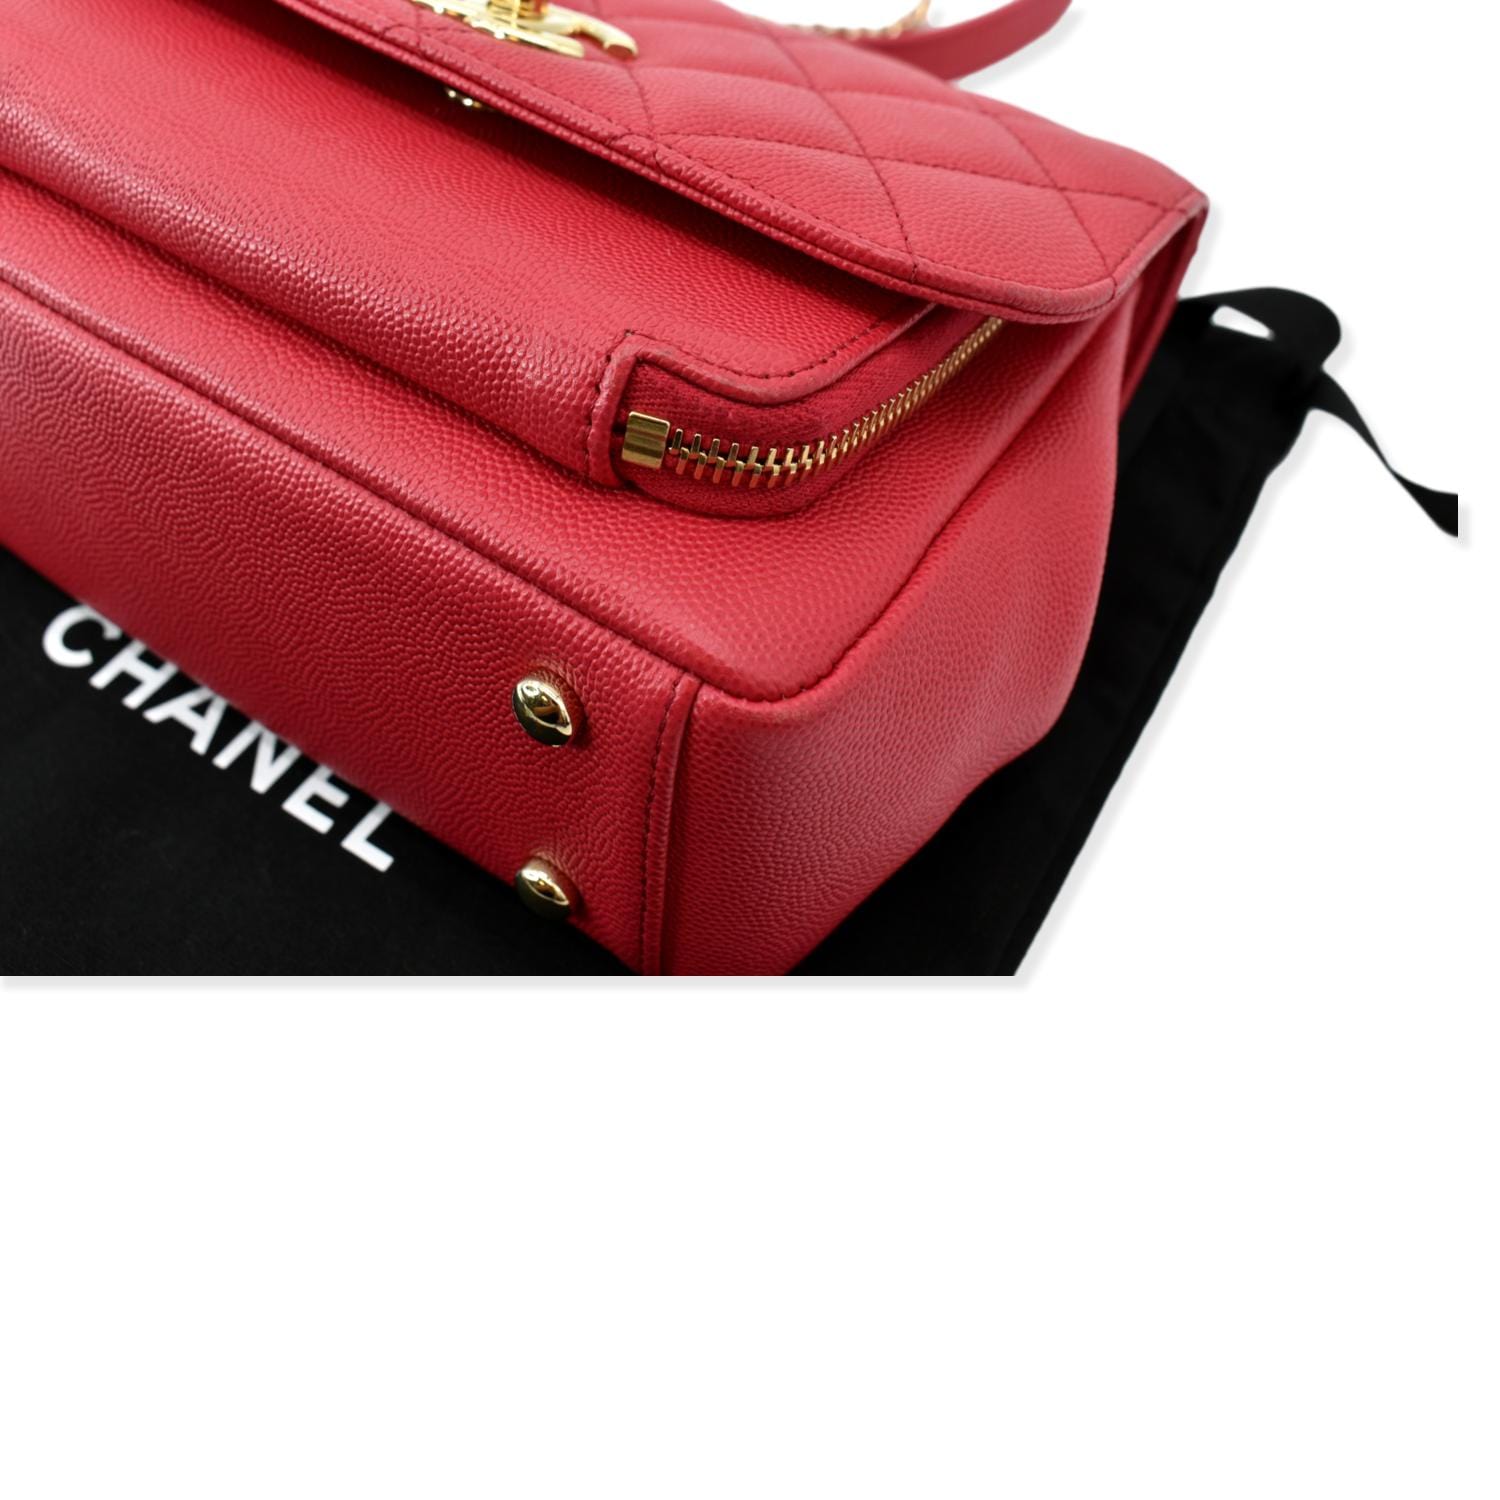 Chanel The Business Flap Bag Red